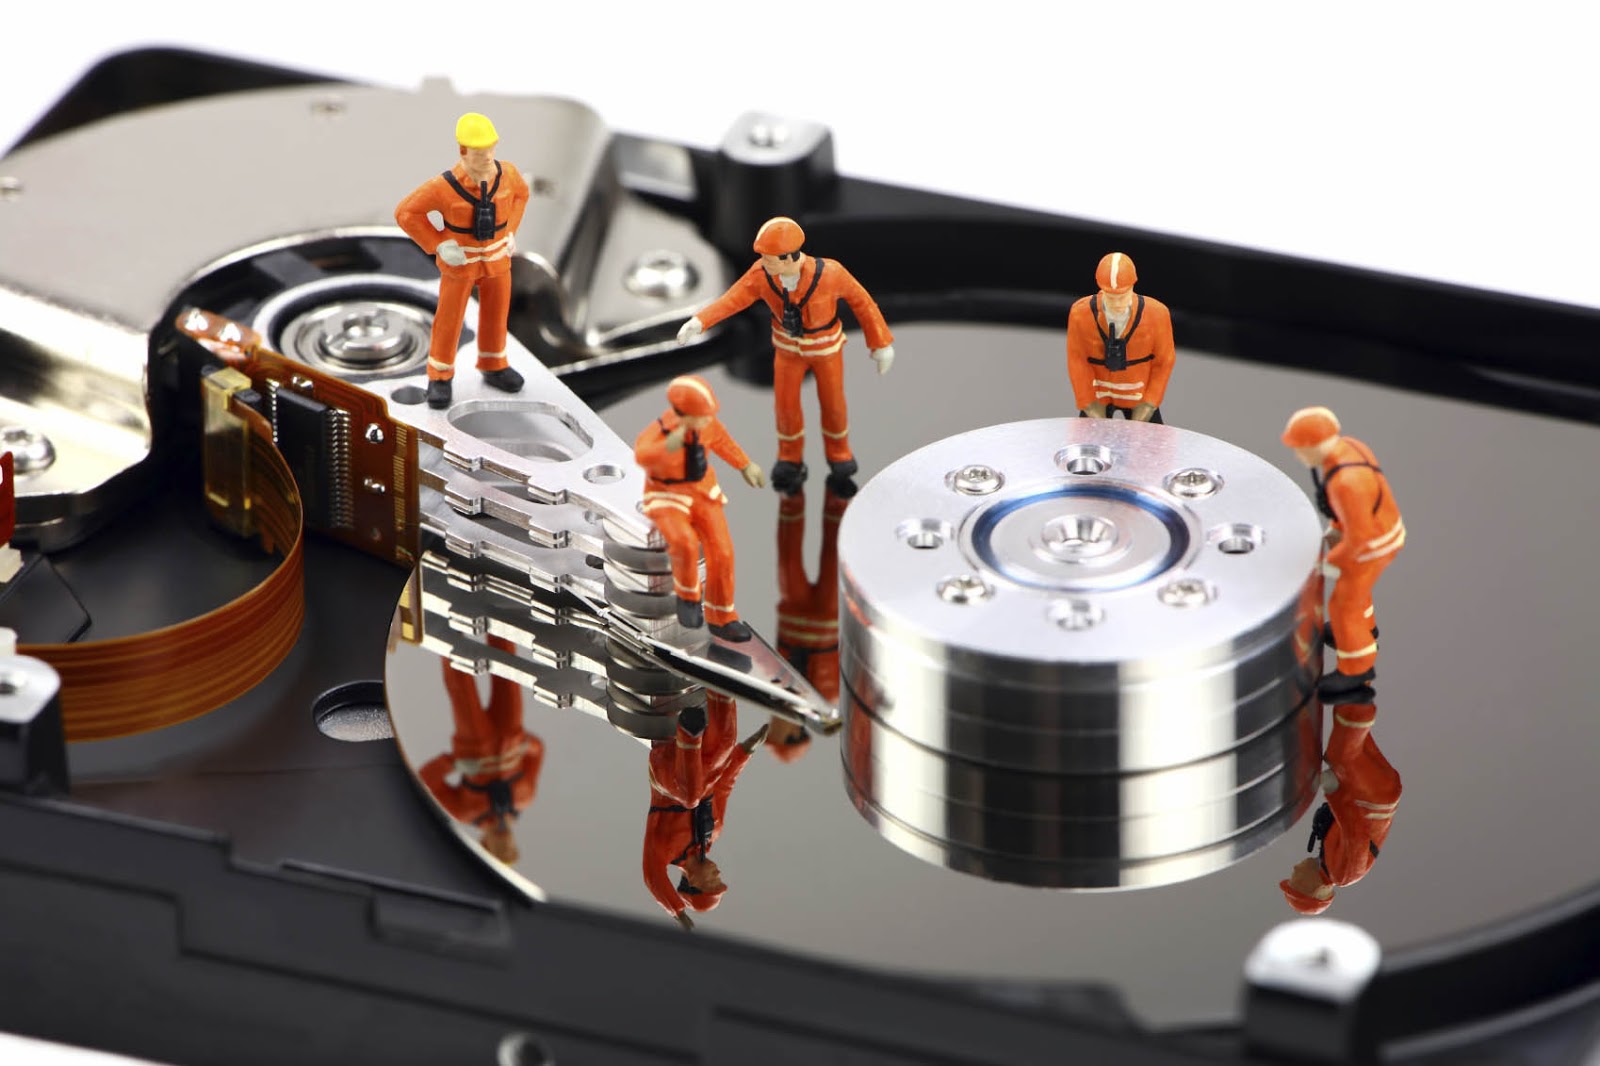 Recover lost data from any Storage device using EaseUS Data Recovery Wizard 1